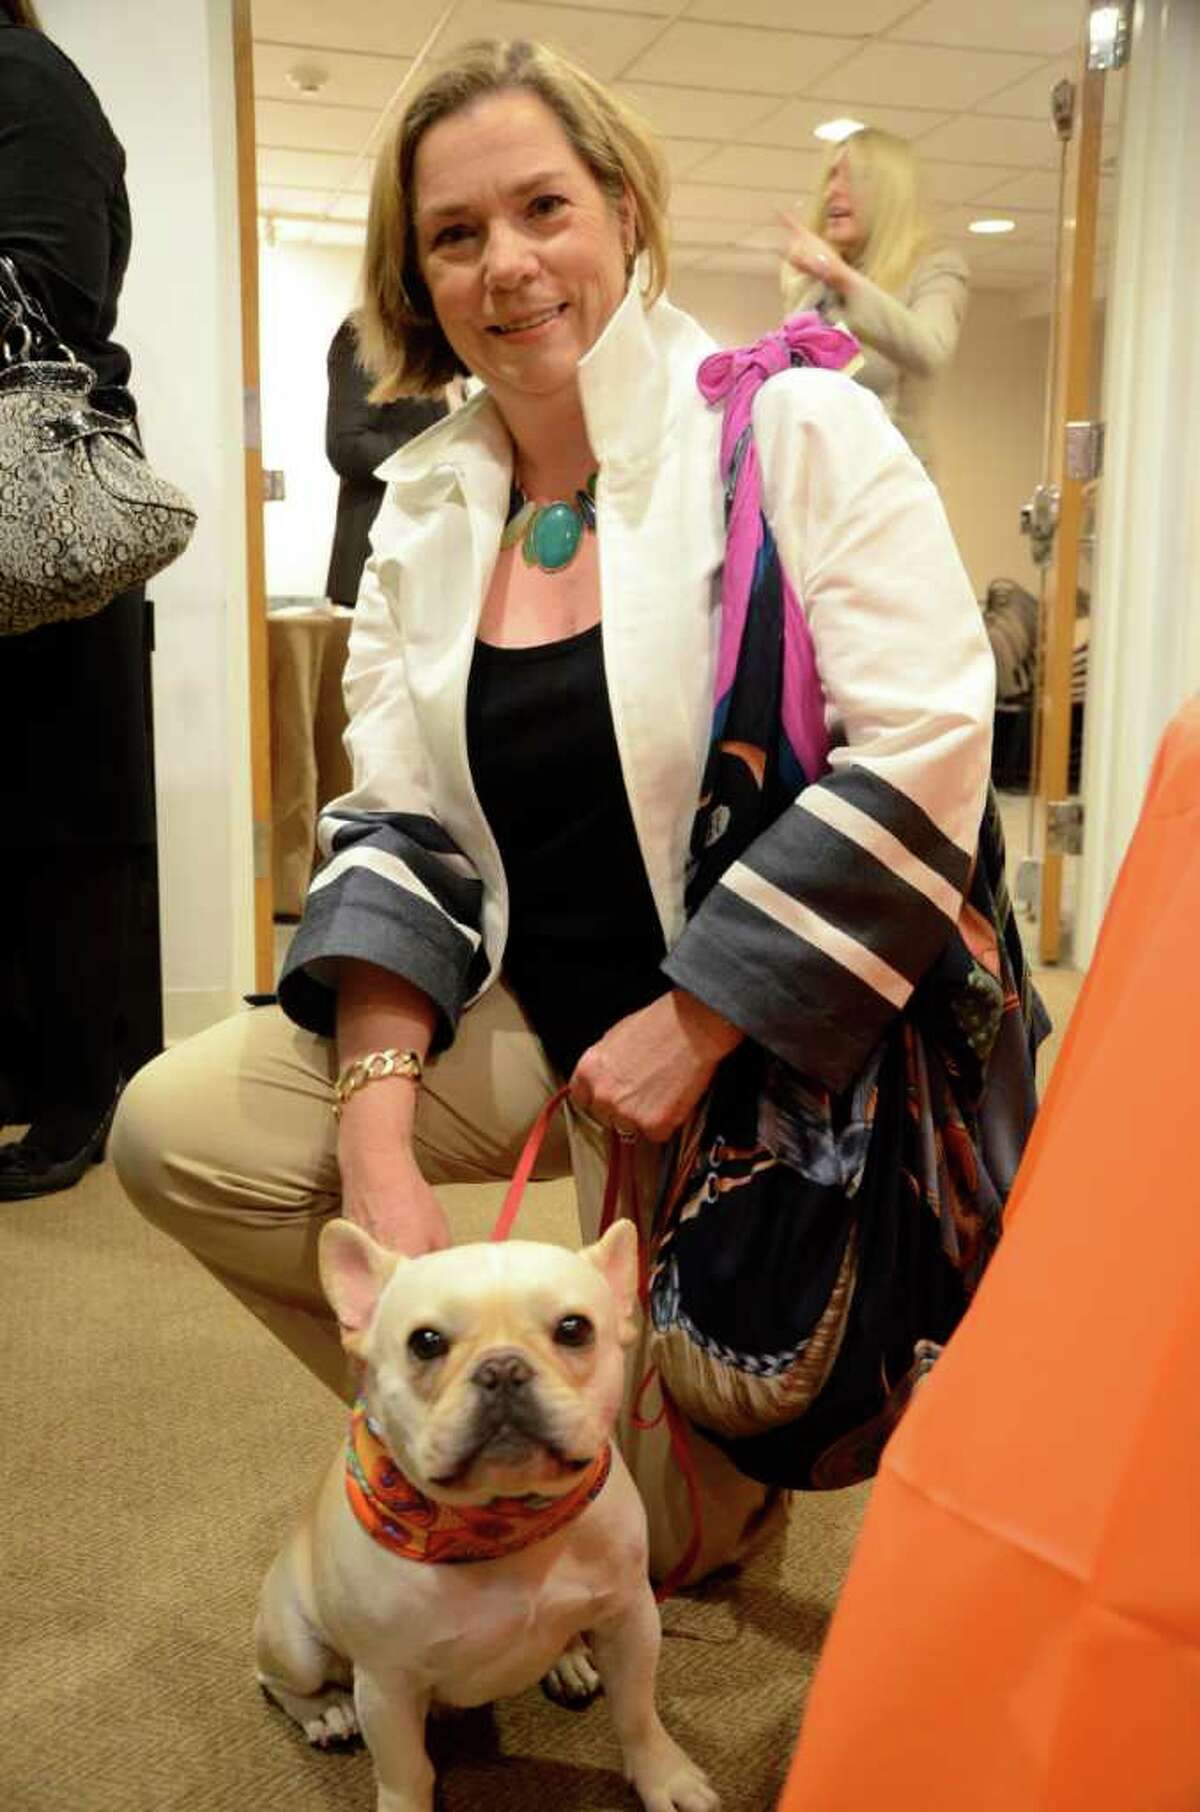 Two of the models of the evening: Anda Hutchins carrying her Hermes hobo bag, and her french bulldog Calvin, sporting an Hermes collar!